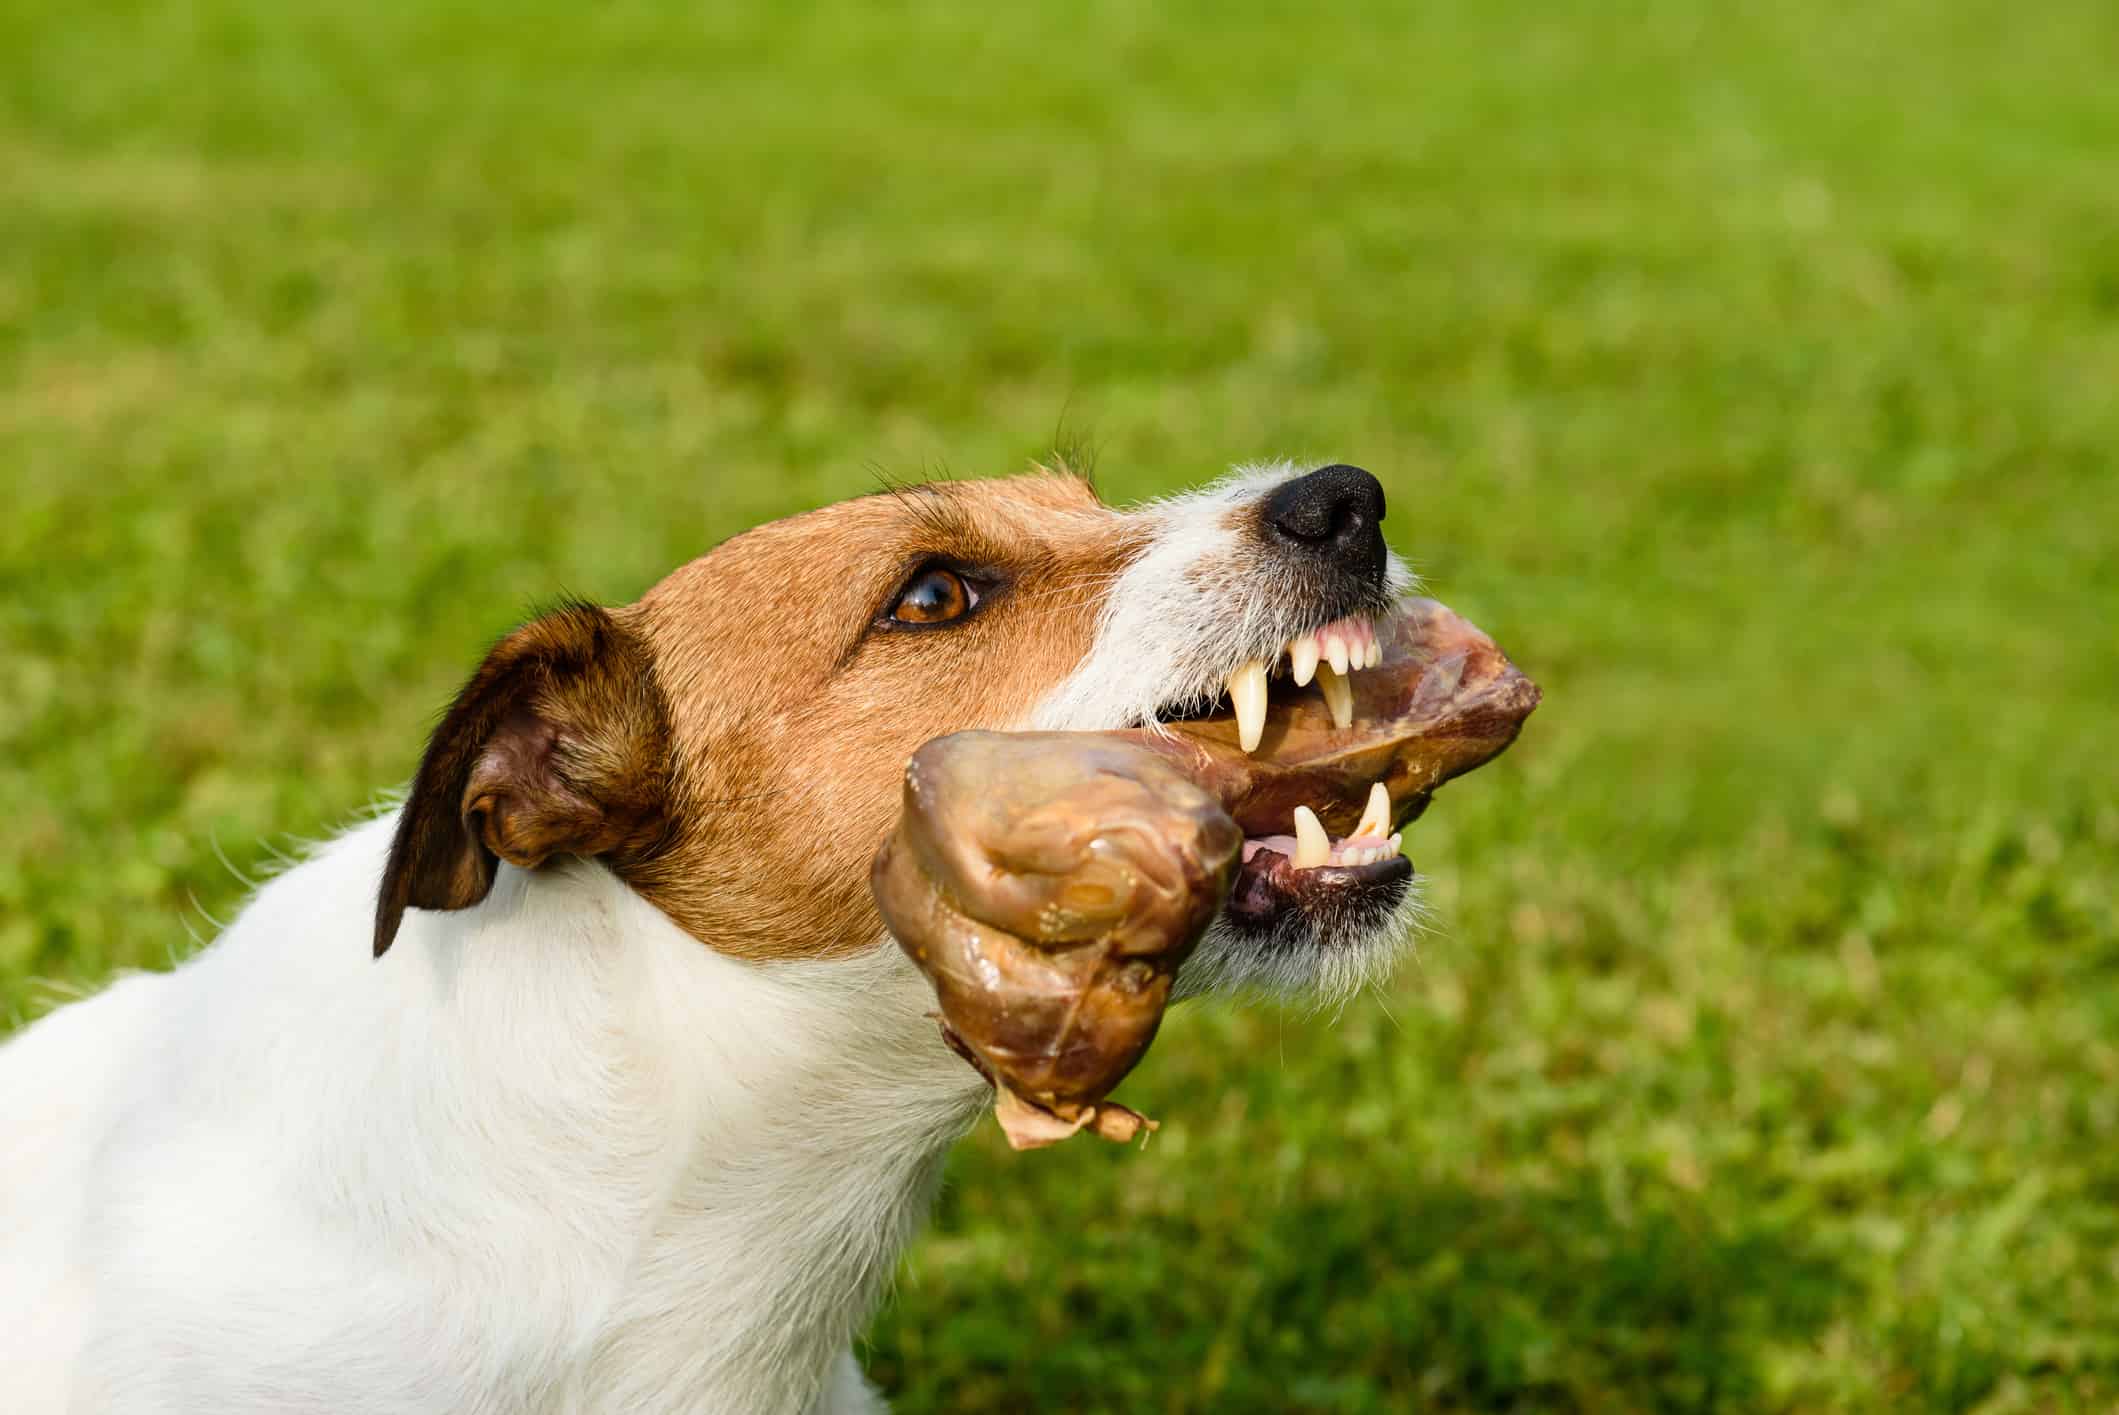 Snarling dog shows teeth and fangs defending its bone